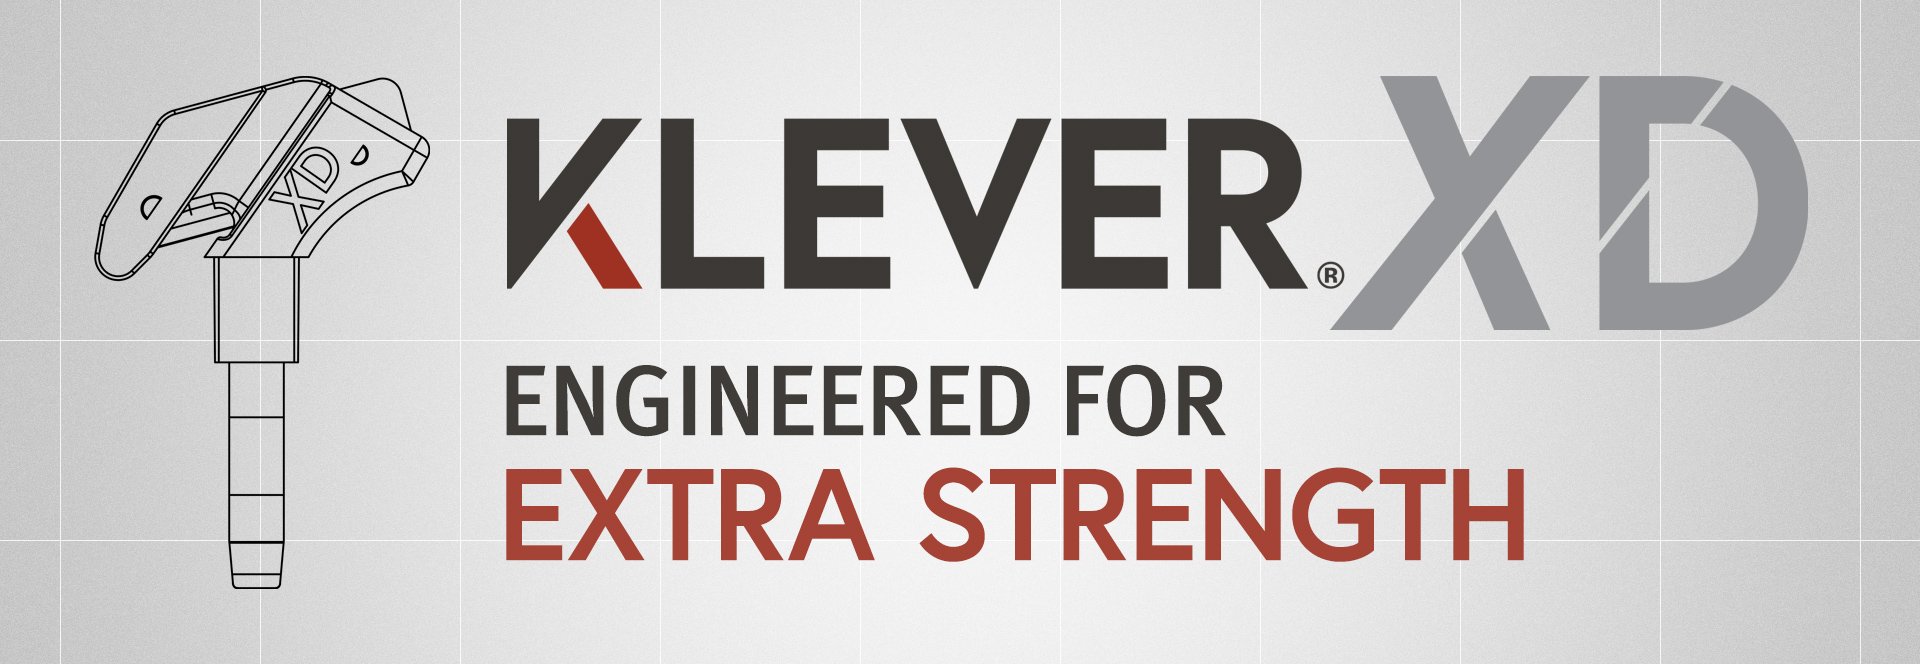 Klever XD: Engineered for Extra Strength